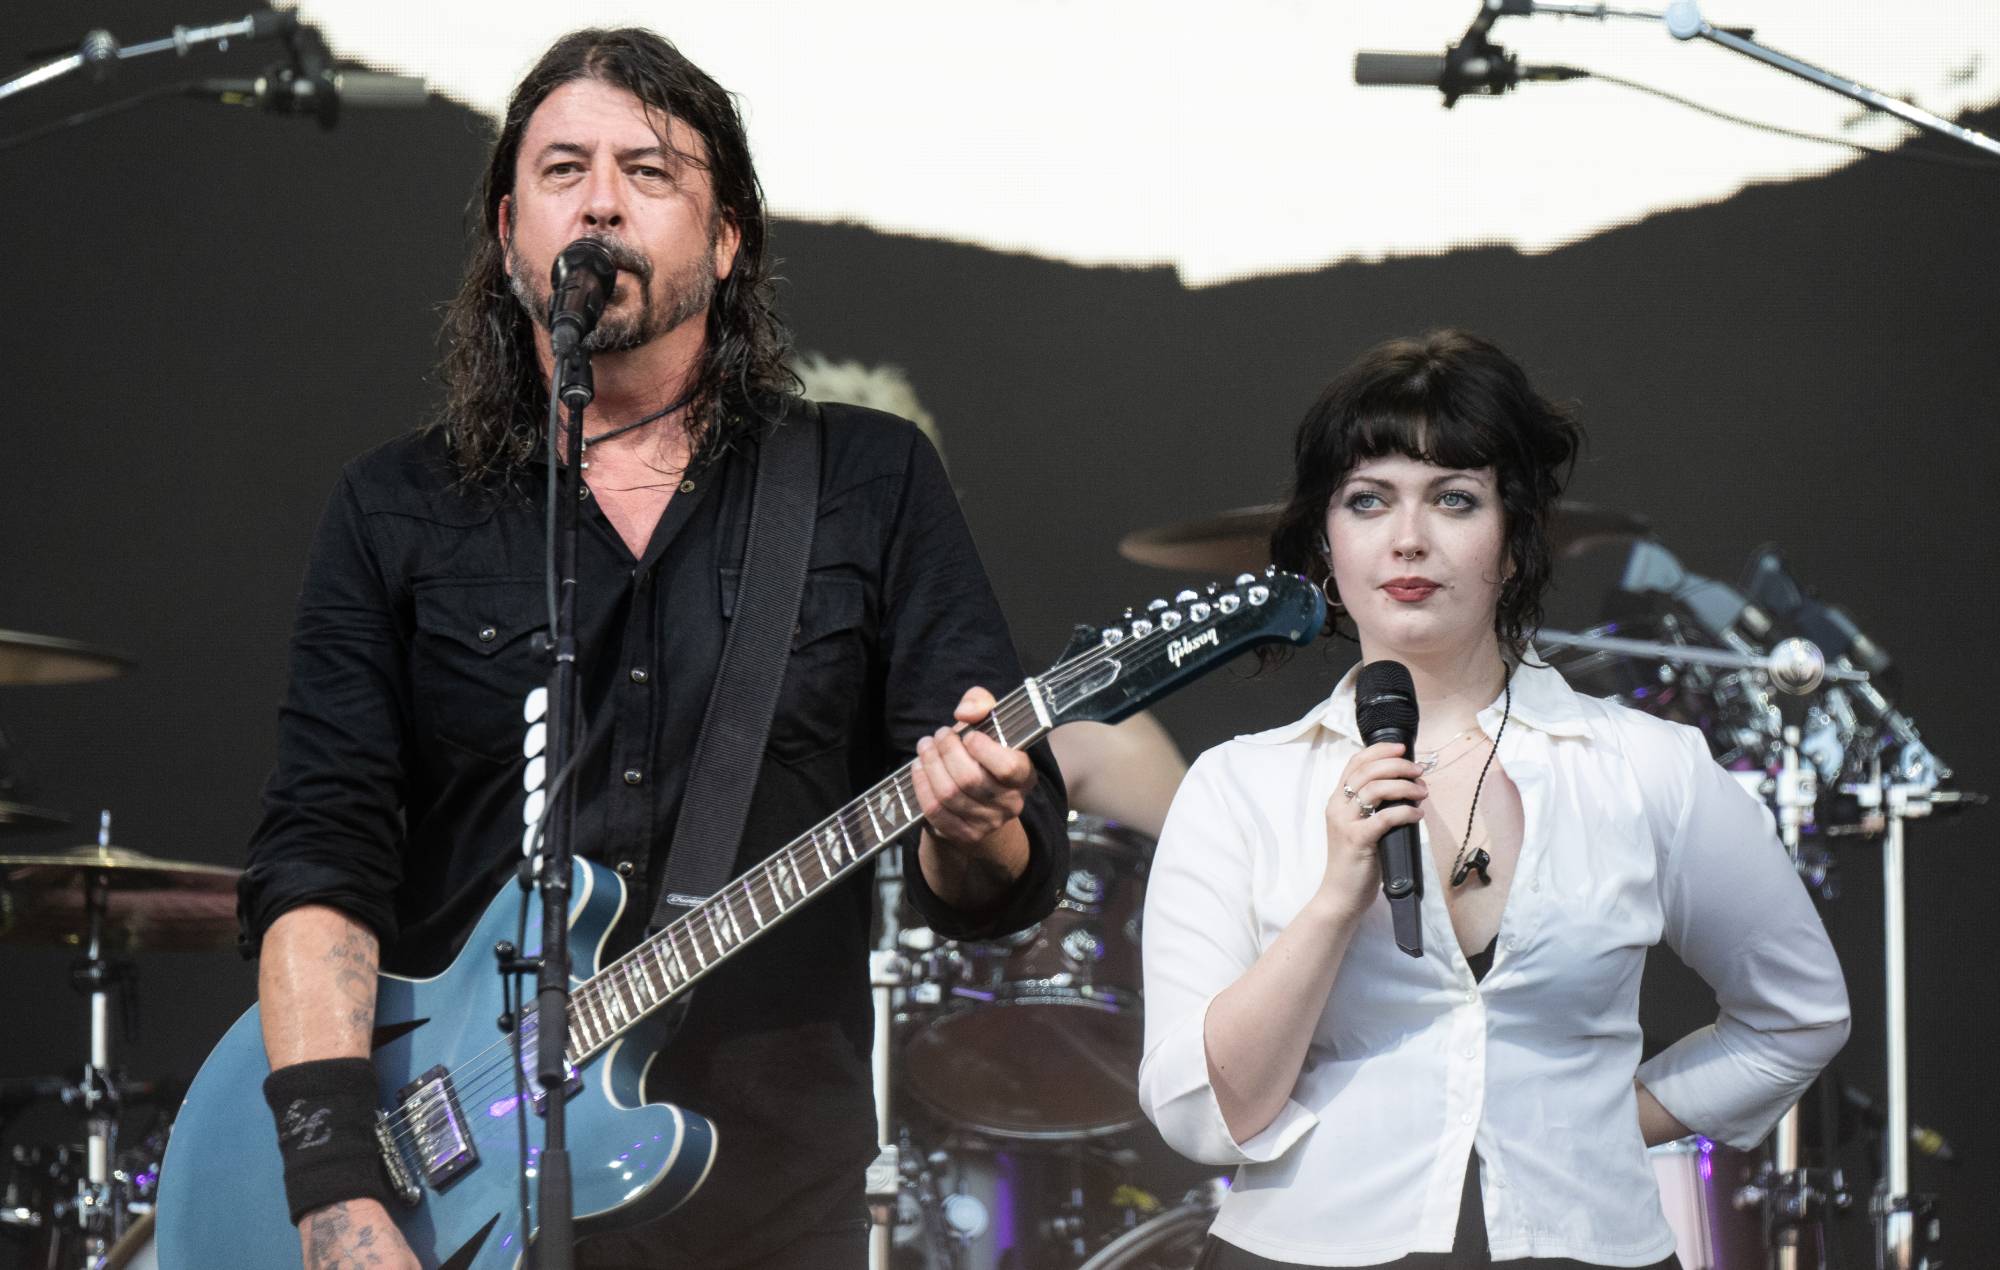 Watch Dave Grohl join daughter Violet to cover Nirvana and Foo Fighters